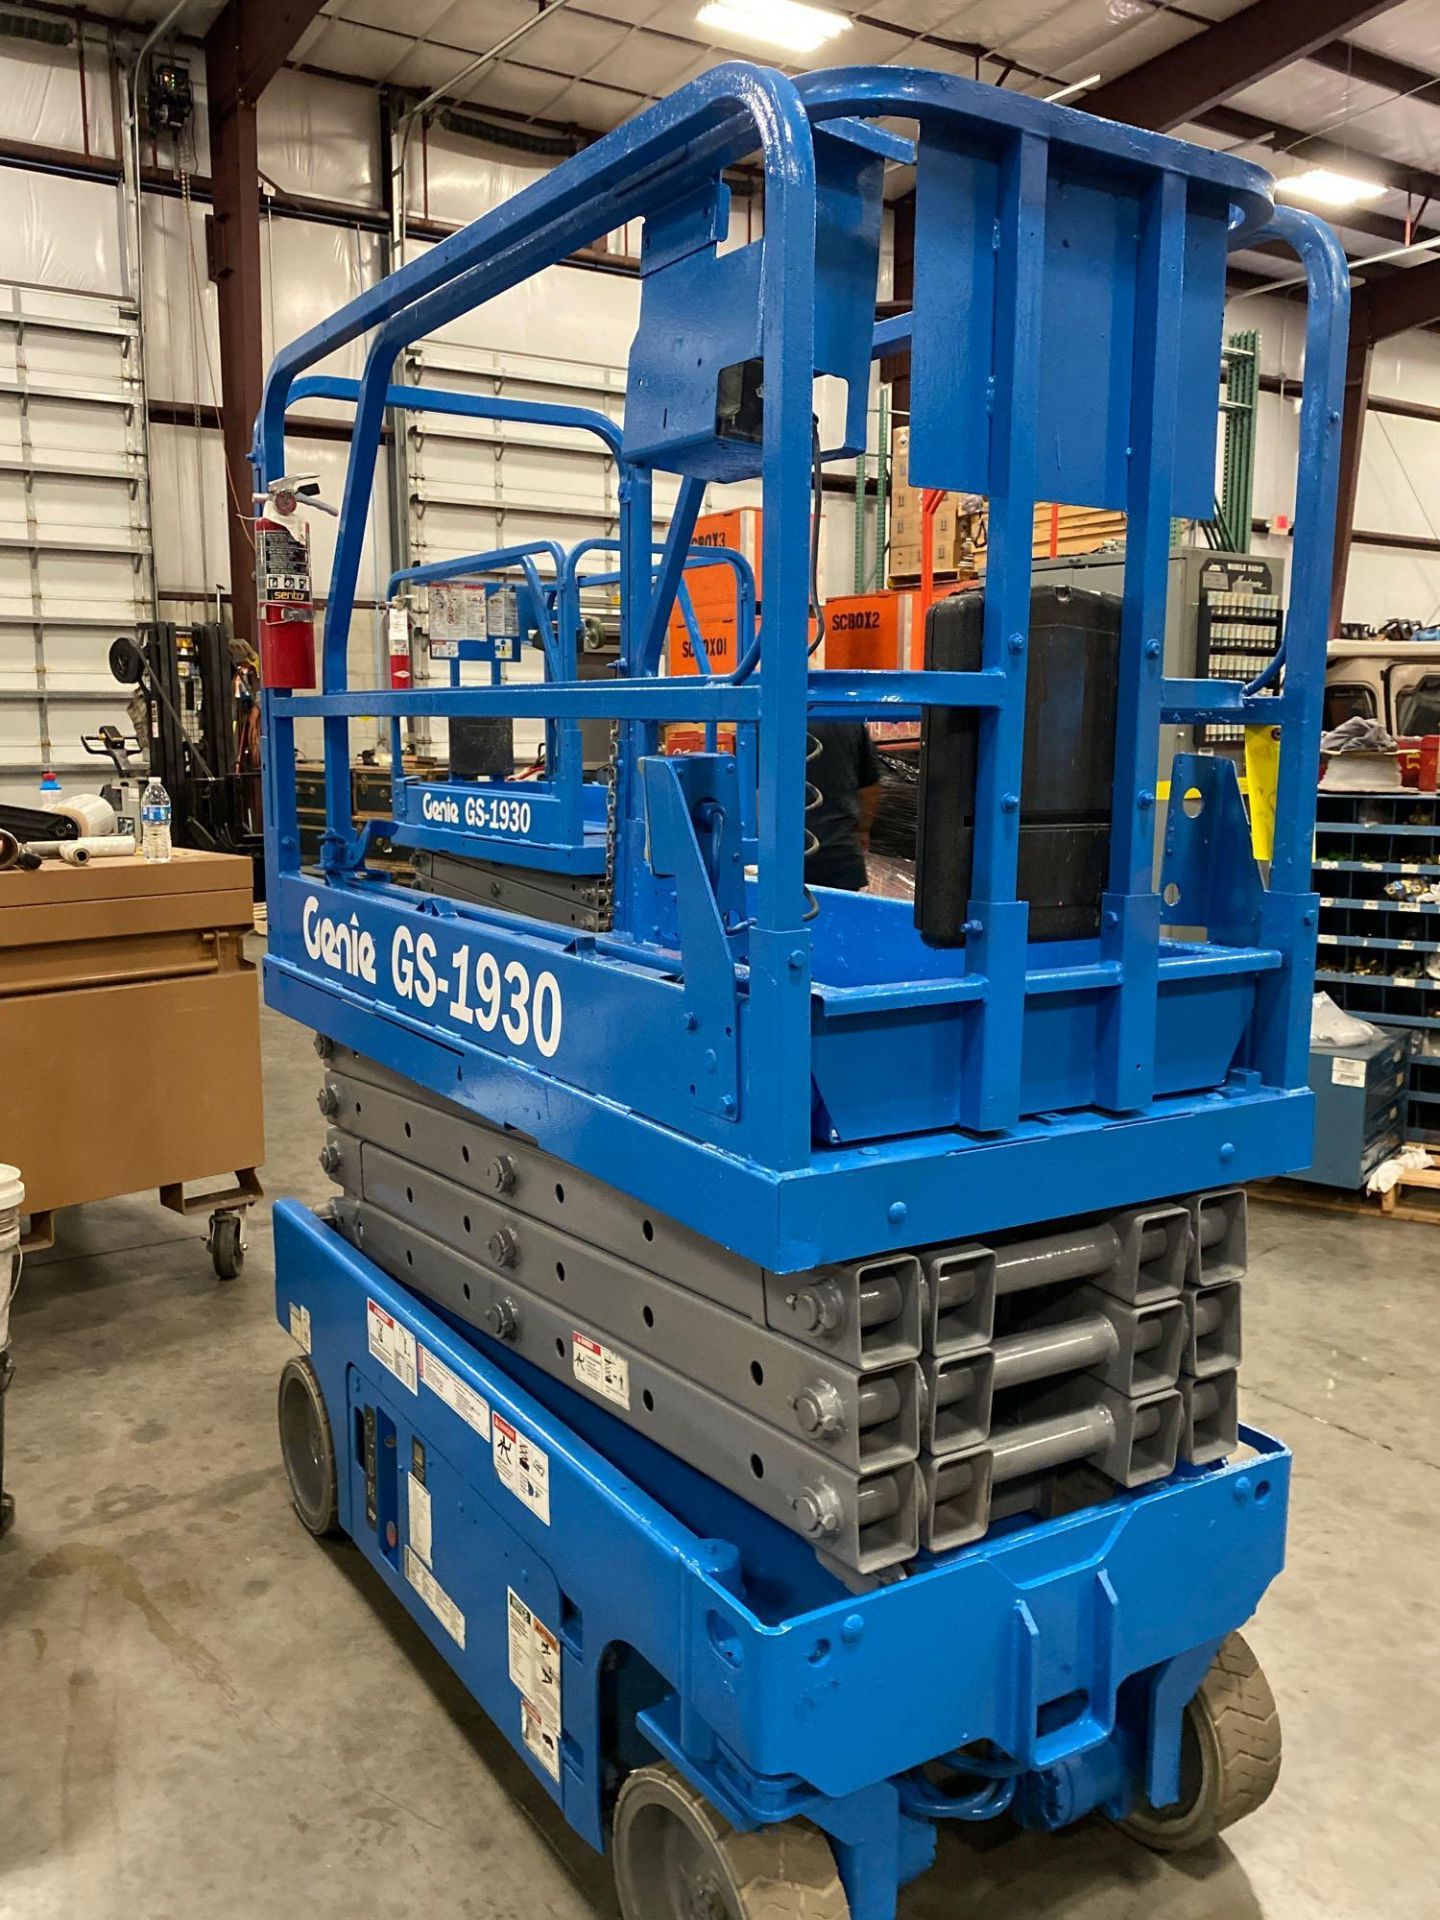 GENIE GS1930 SCISSOR LIFT, SELF PROPELLED, 19' PLATFORM HEIGHT, BUILT IN BATTERY CHARGER, SLIDE OUT - Image 2 of 12